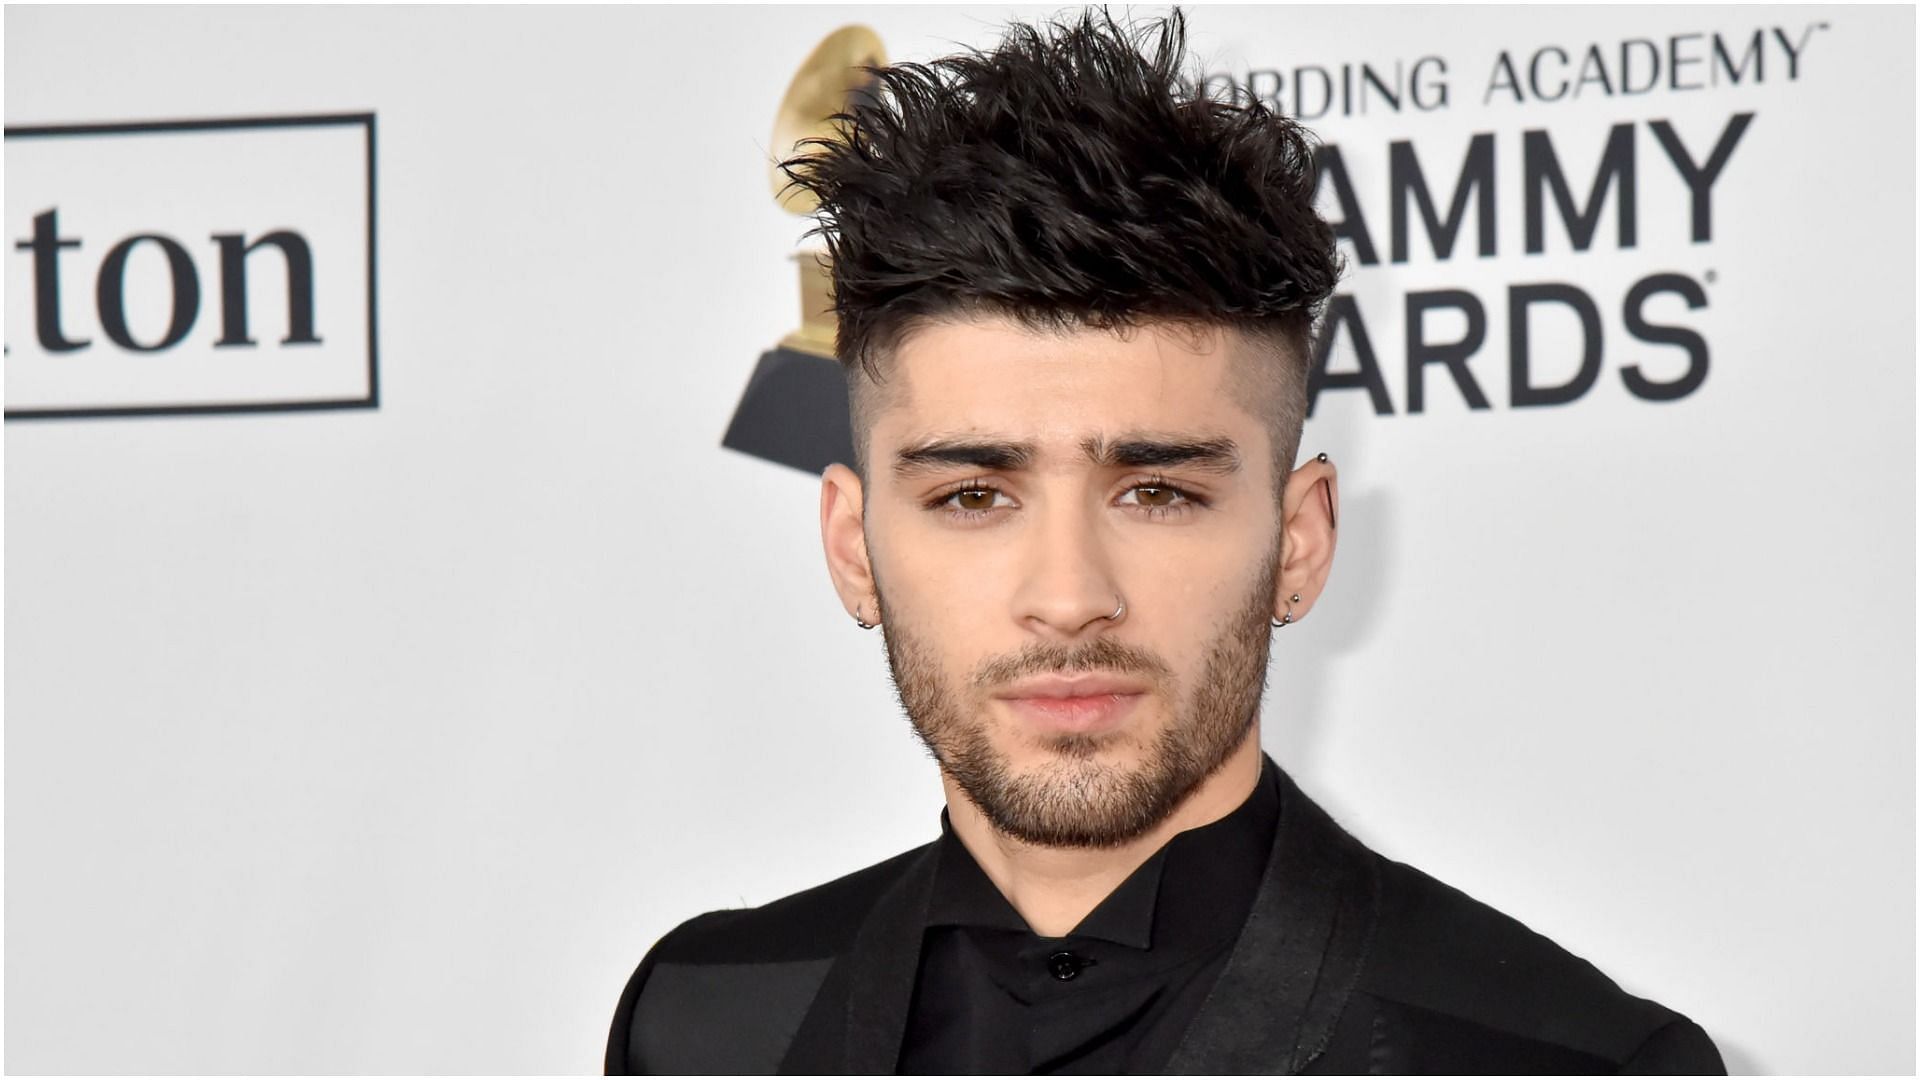 Zayn Malik attends the Clive Davis and Recording Academy Pre-GRAMMY Gala and GRAMMY Salute to Industry Icons Honoring Jay-Z on January 27, 2018, in New York City (Image via Getty Images)